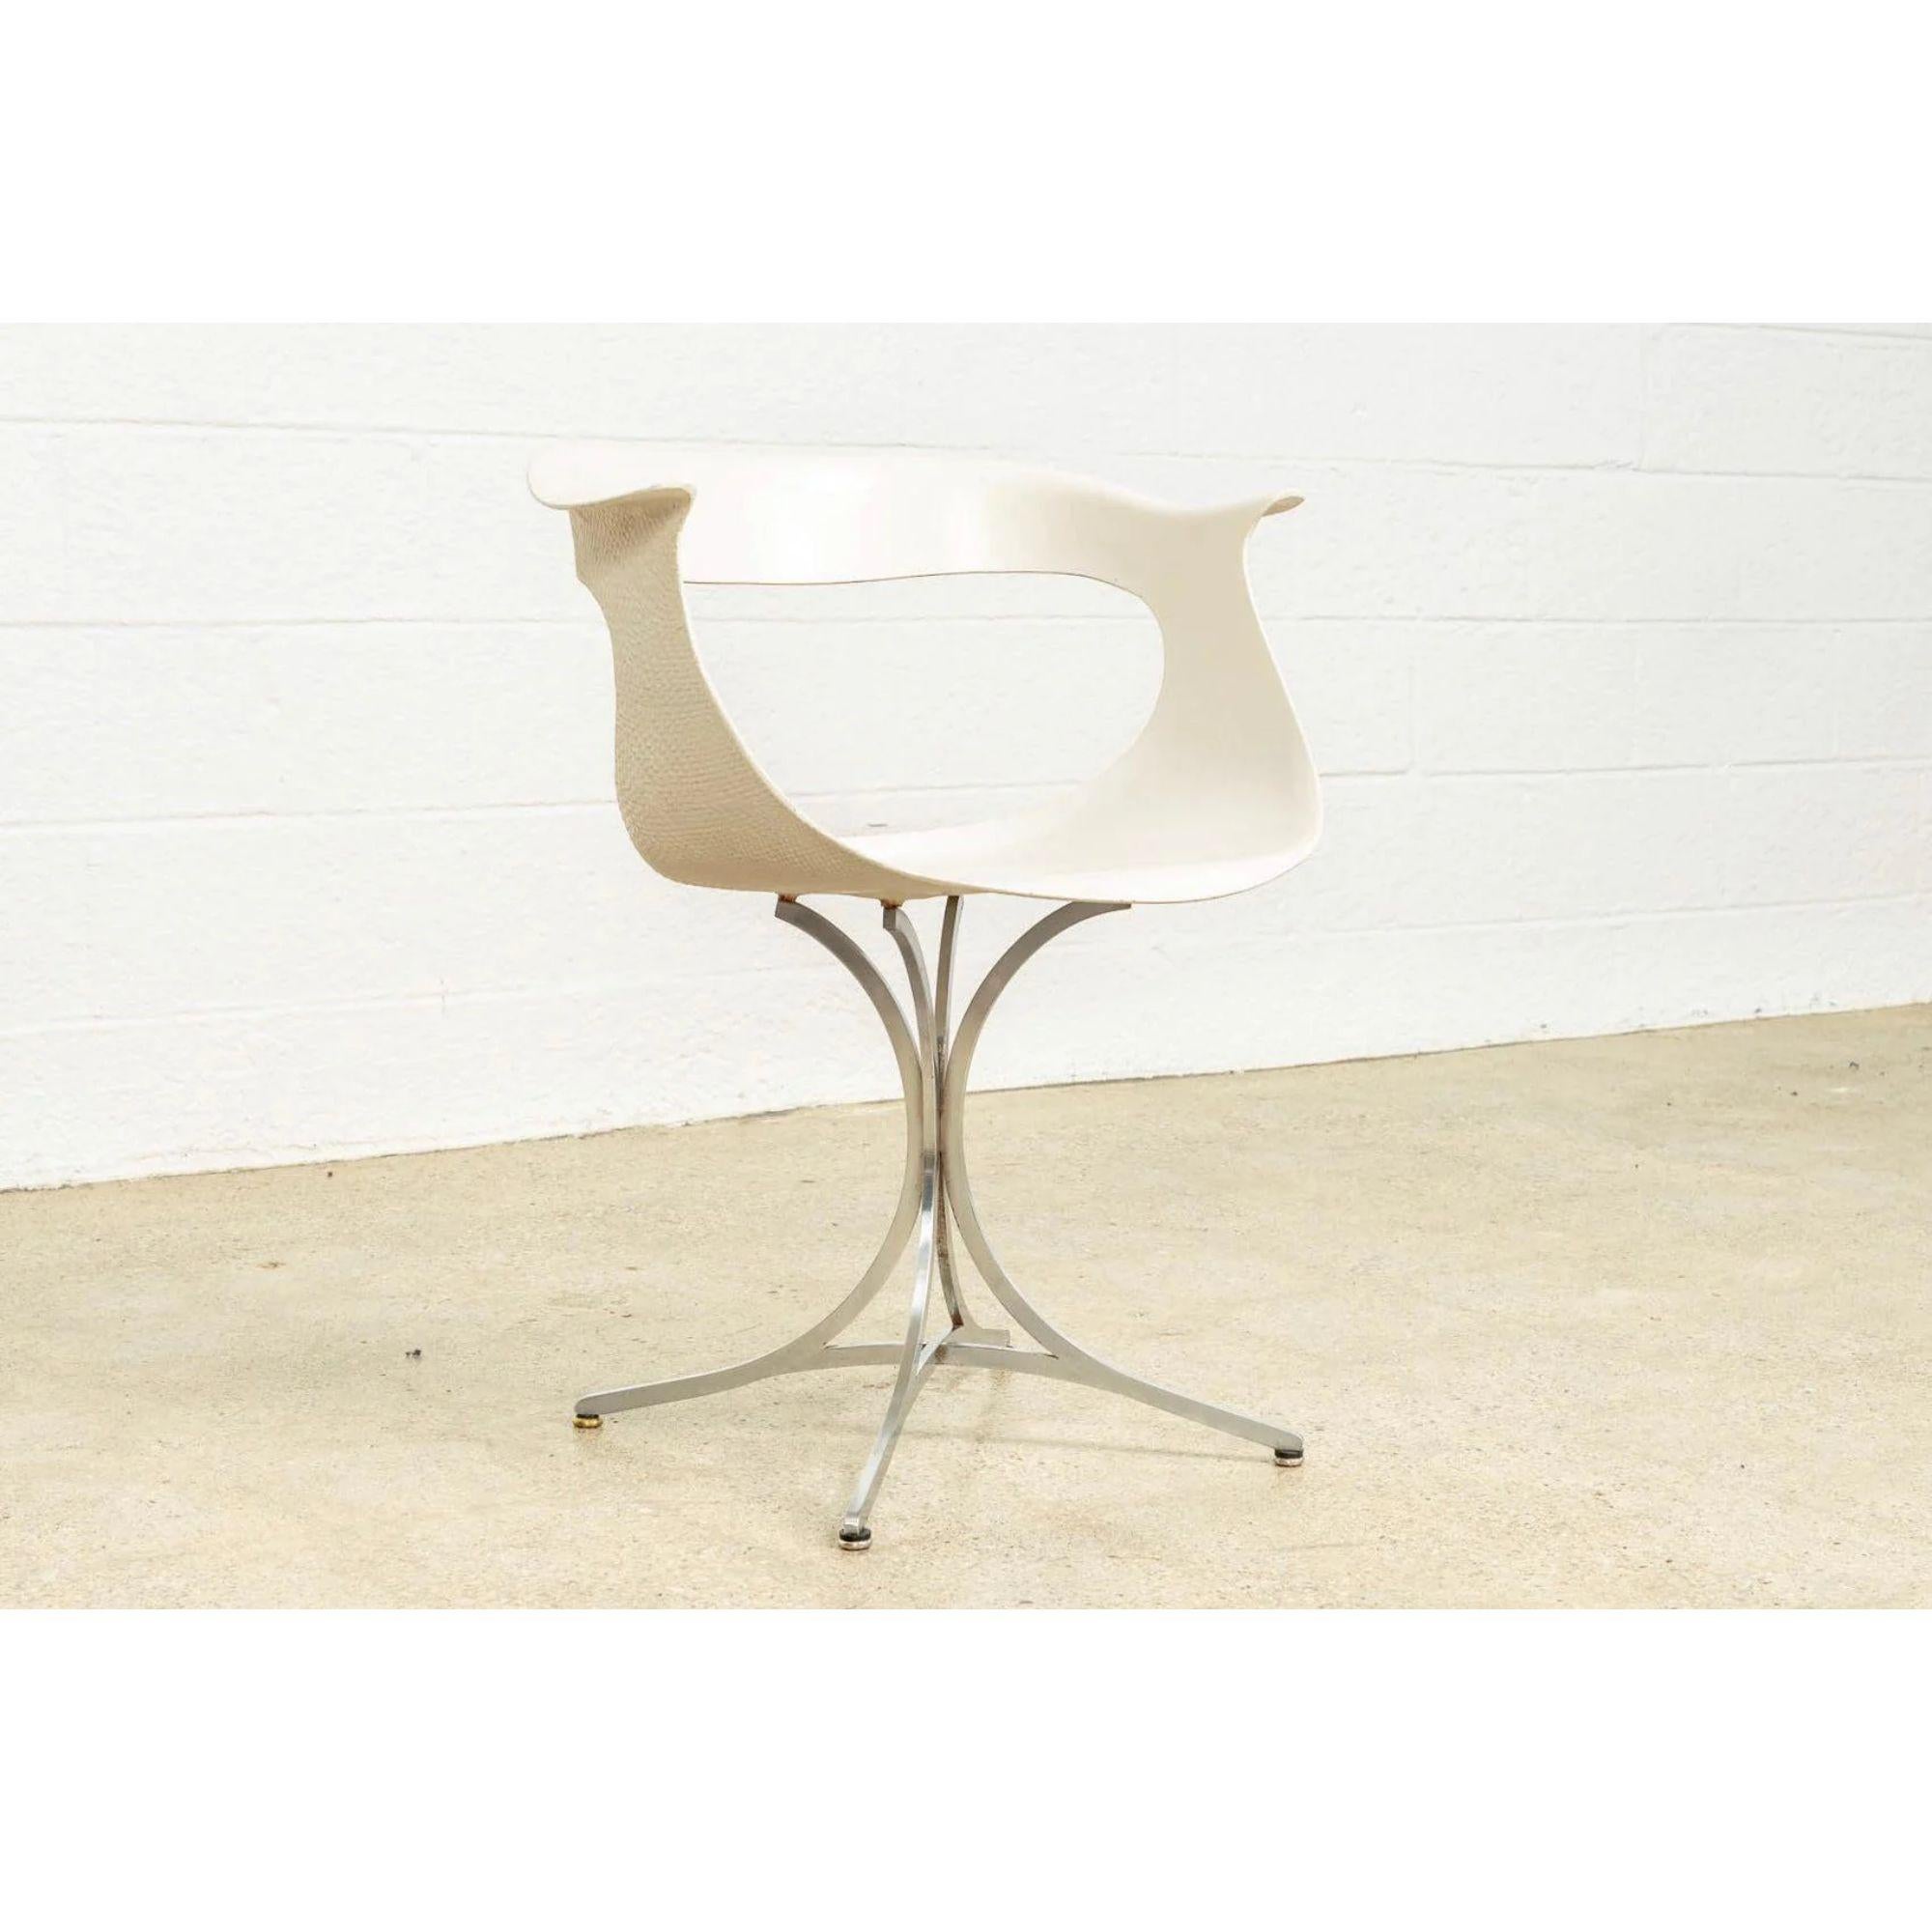 This vintage Mid-Century Modern “Lotus” white on chrome armchair was designed by American husband and wife team Erwine and Estelle Laverne for Laverne International circa 1950. The iconic design features clean lines and elegant curves. The